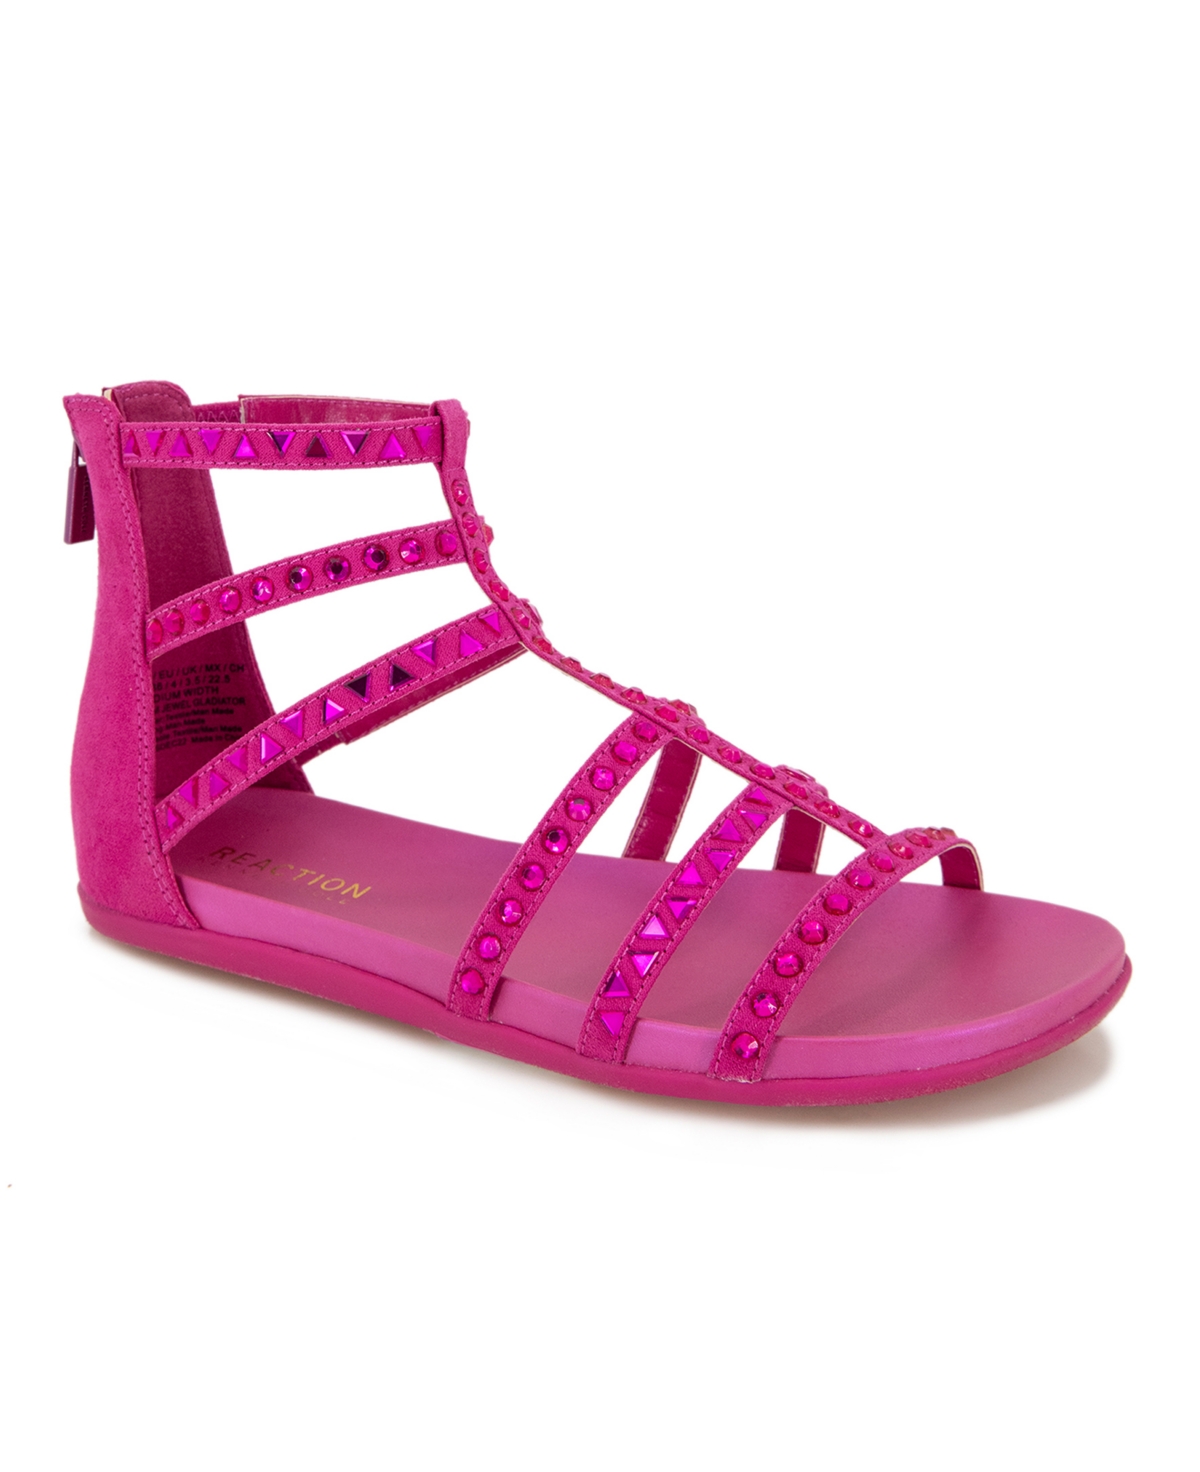 Kenneth Cole Reaction Women's Slim Jewel Gladiator Flat Sandals In Bright Pink